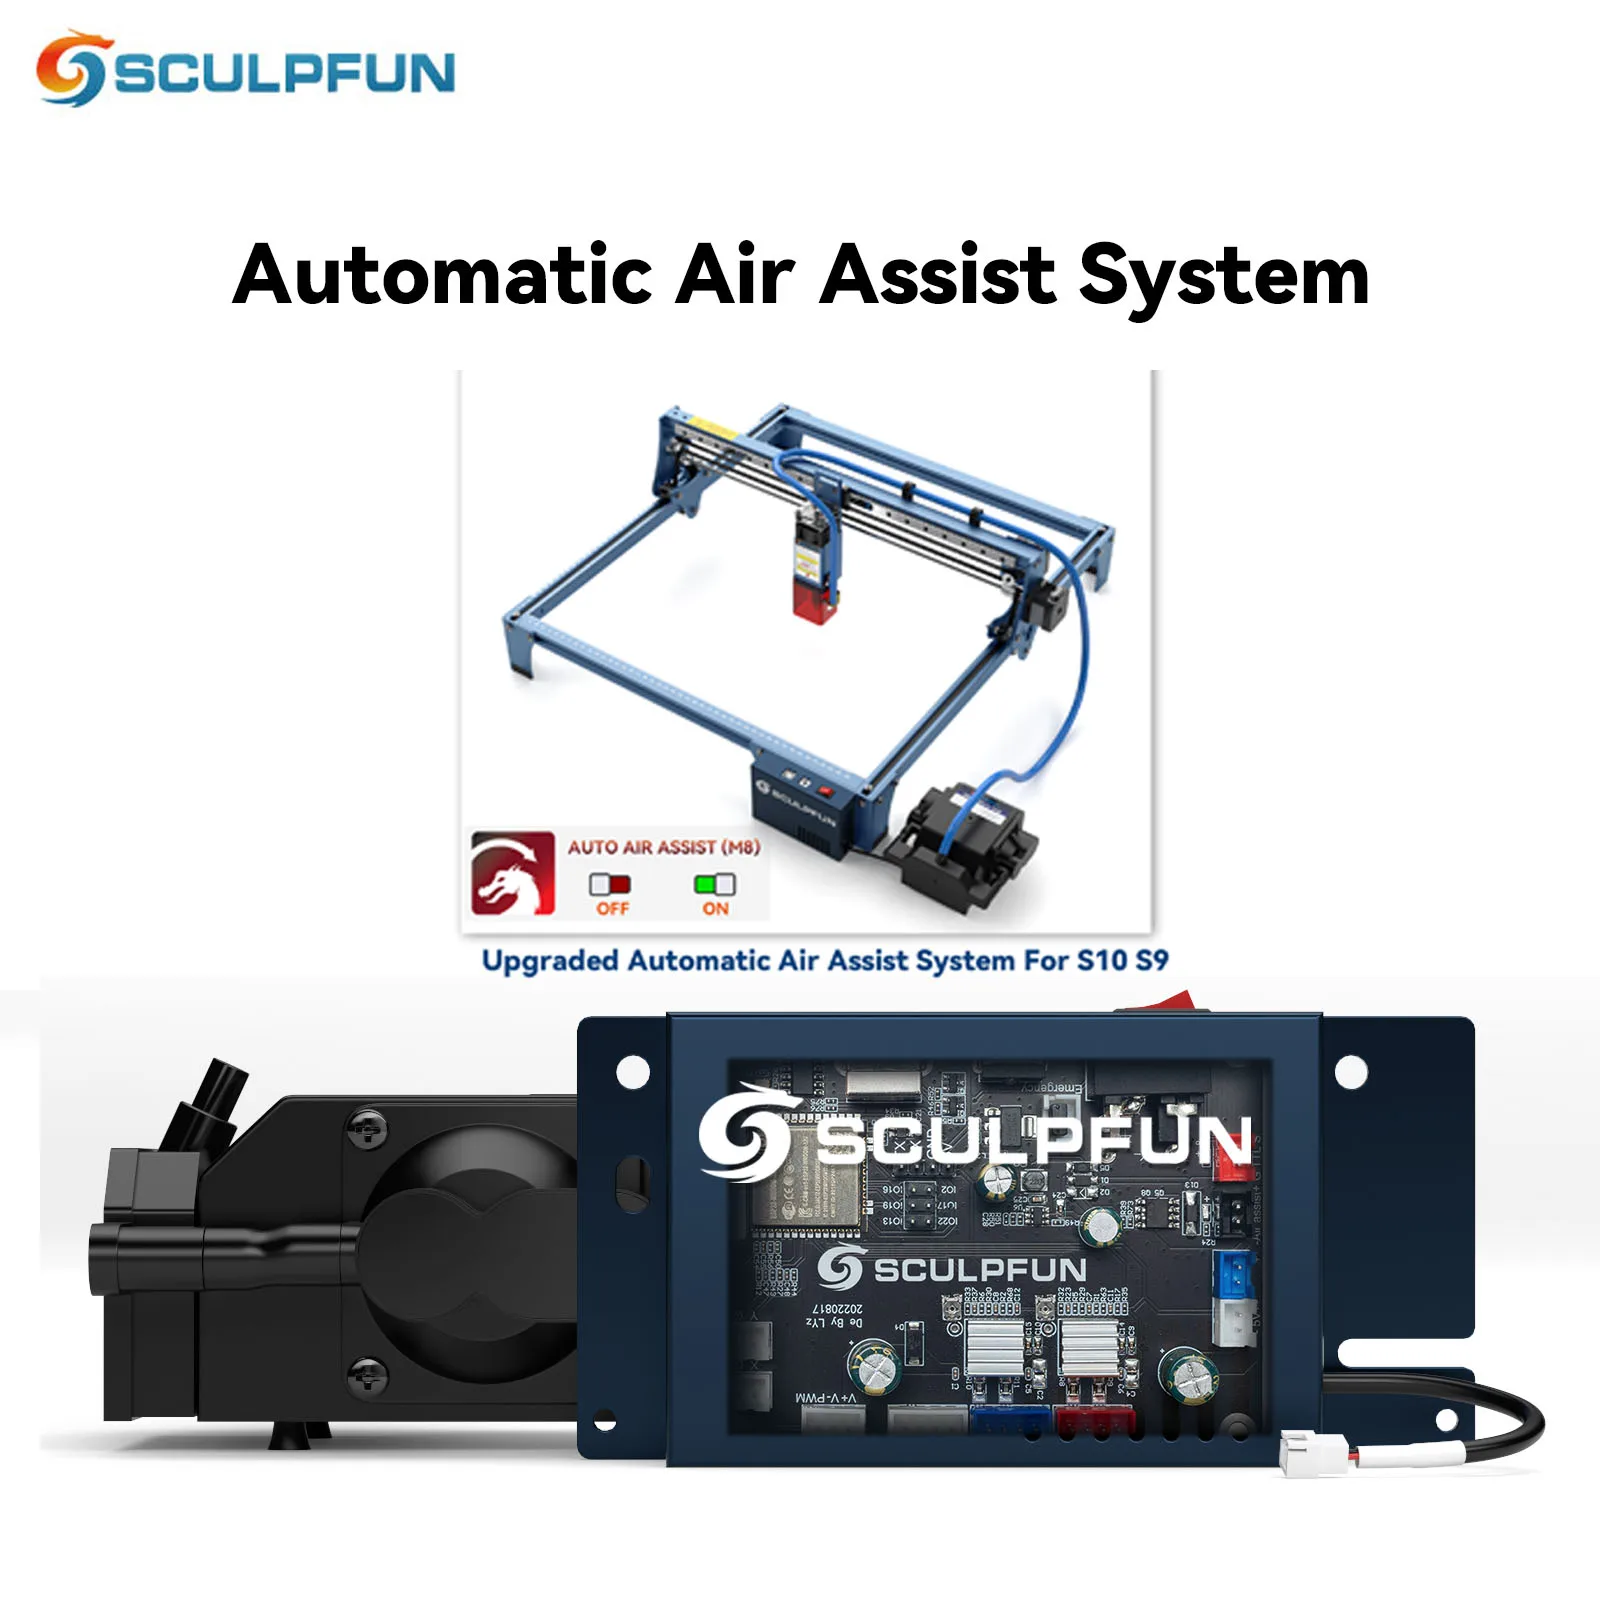  SCULPFUN S9 Laser Engraver Upgrade kit to S30 Ultra 22W, air  Assist, with 22W Laser, 32 bit Main Board, Limit Switch, for Sculpfun S9/S6/S6Pro/S30/S30Pro/S30Pro  Max Laser Engraving Machine(S9 Up 22W)